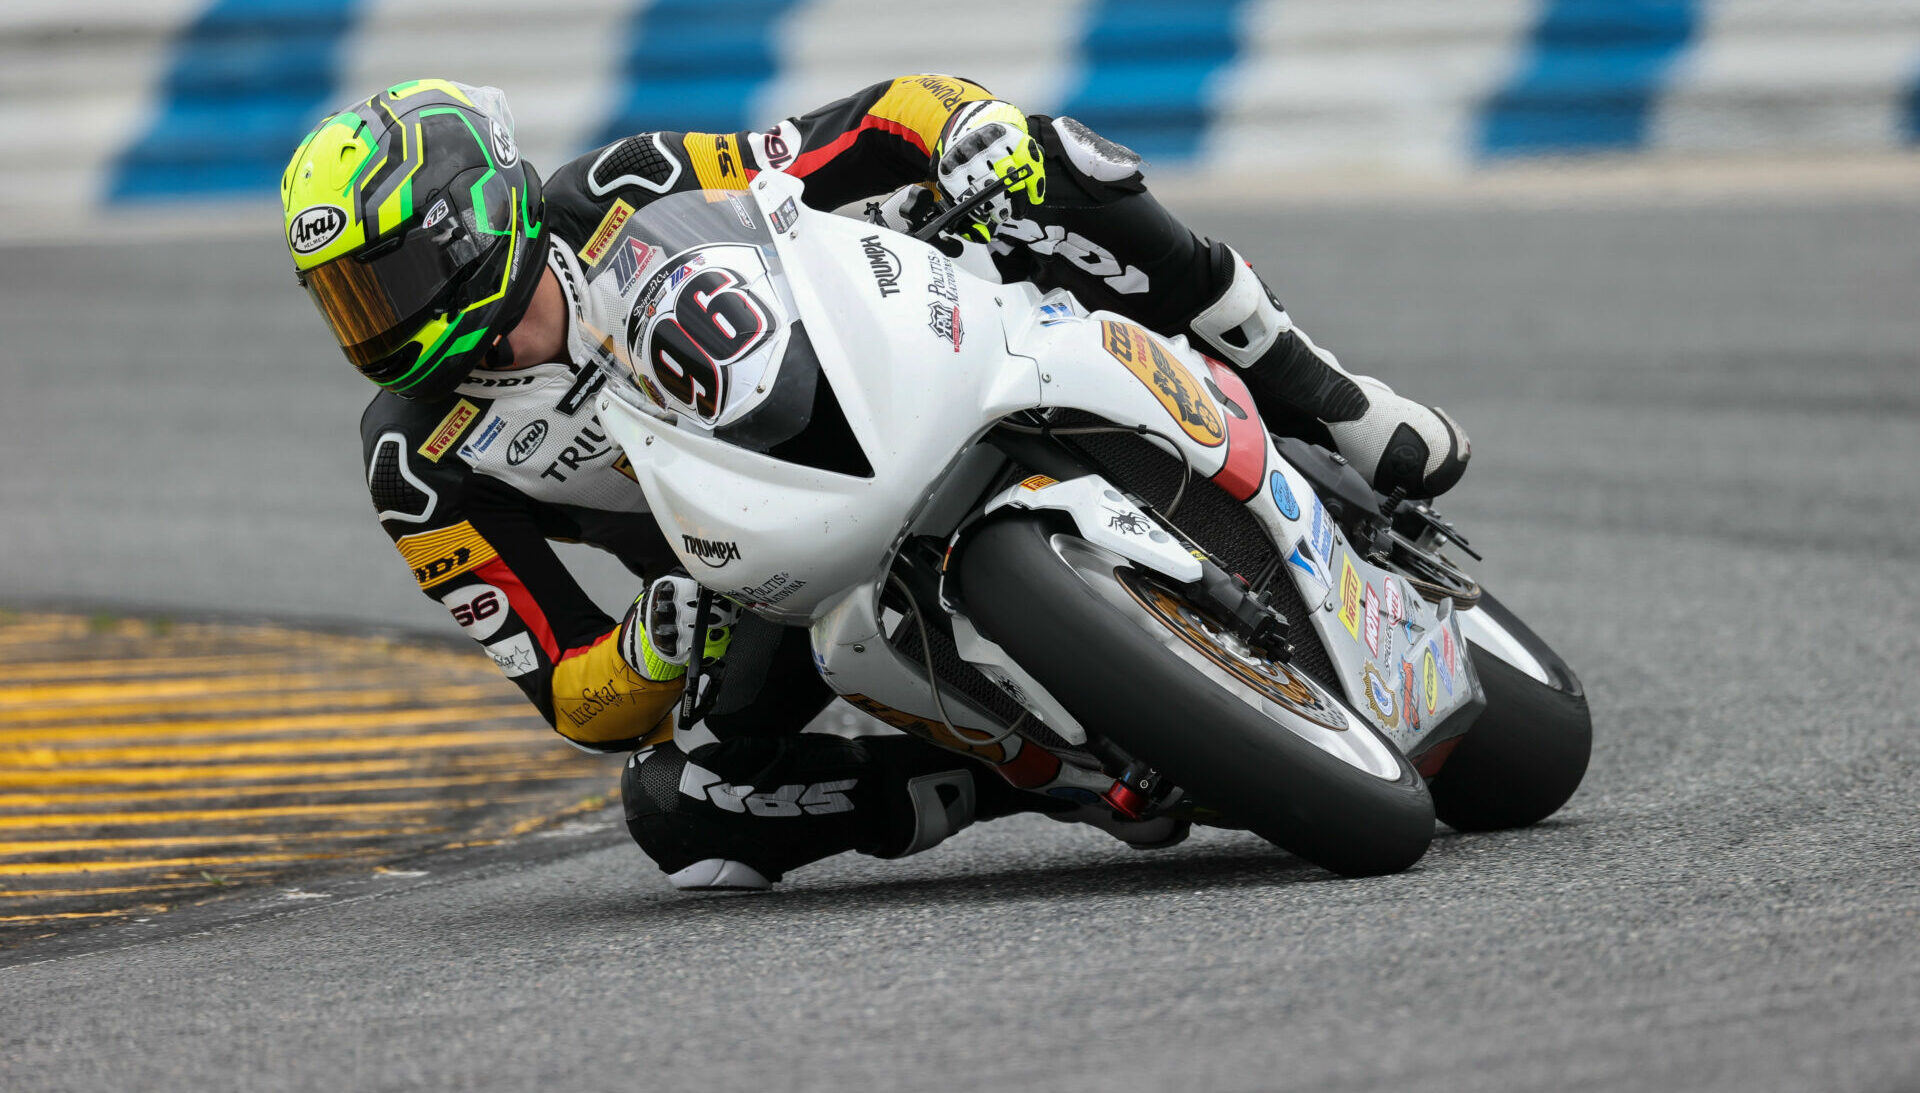 #PirelliNation rider Brandon Paasch (96) chooses Pirelli, including to reach the top step of the podium at the Daytona 200. Photo by Brian J. Nelson, courtesy Pirelli.